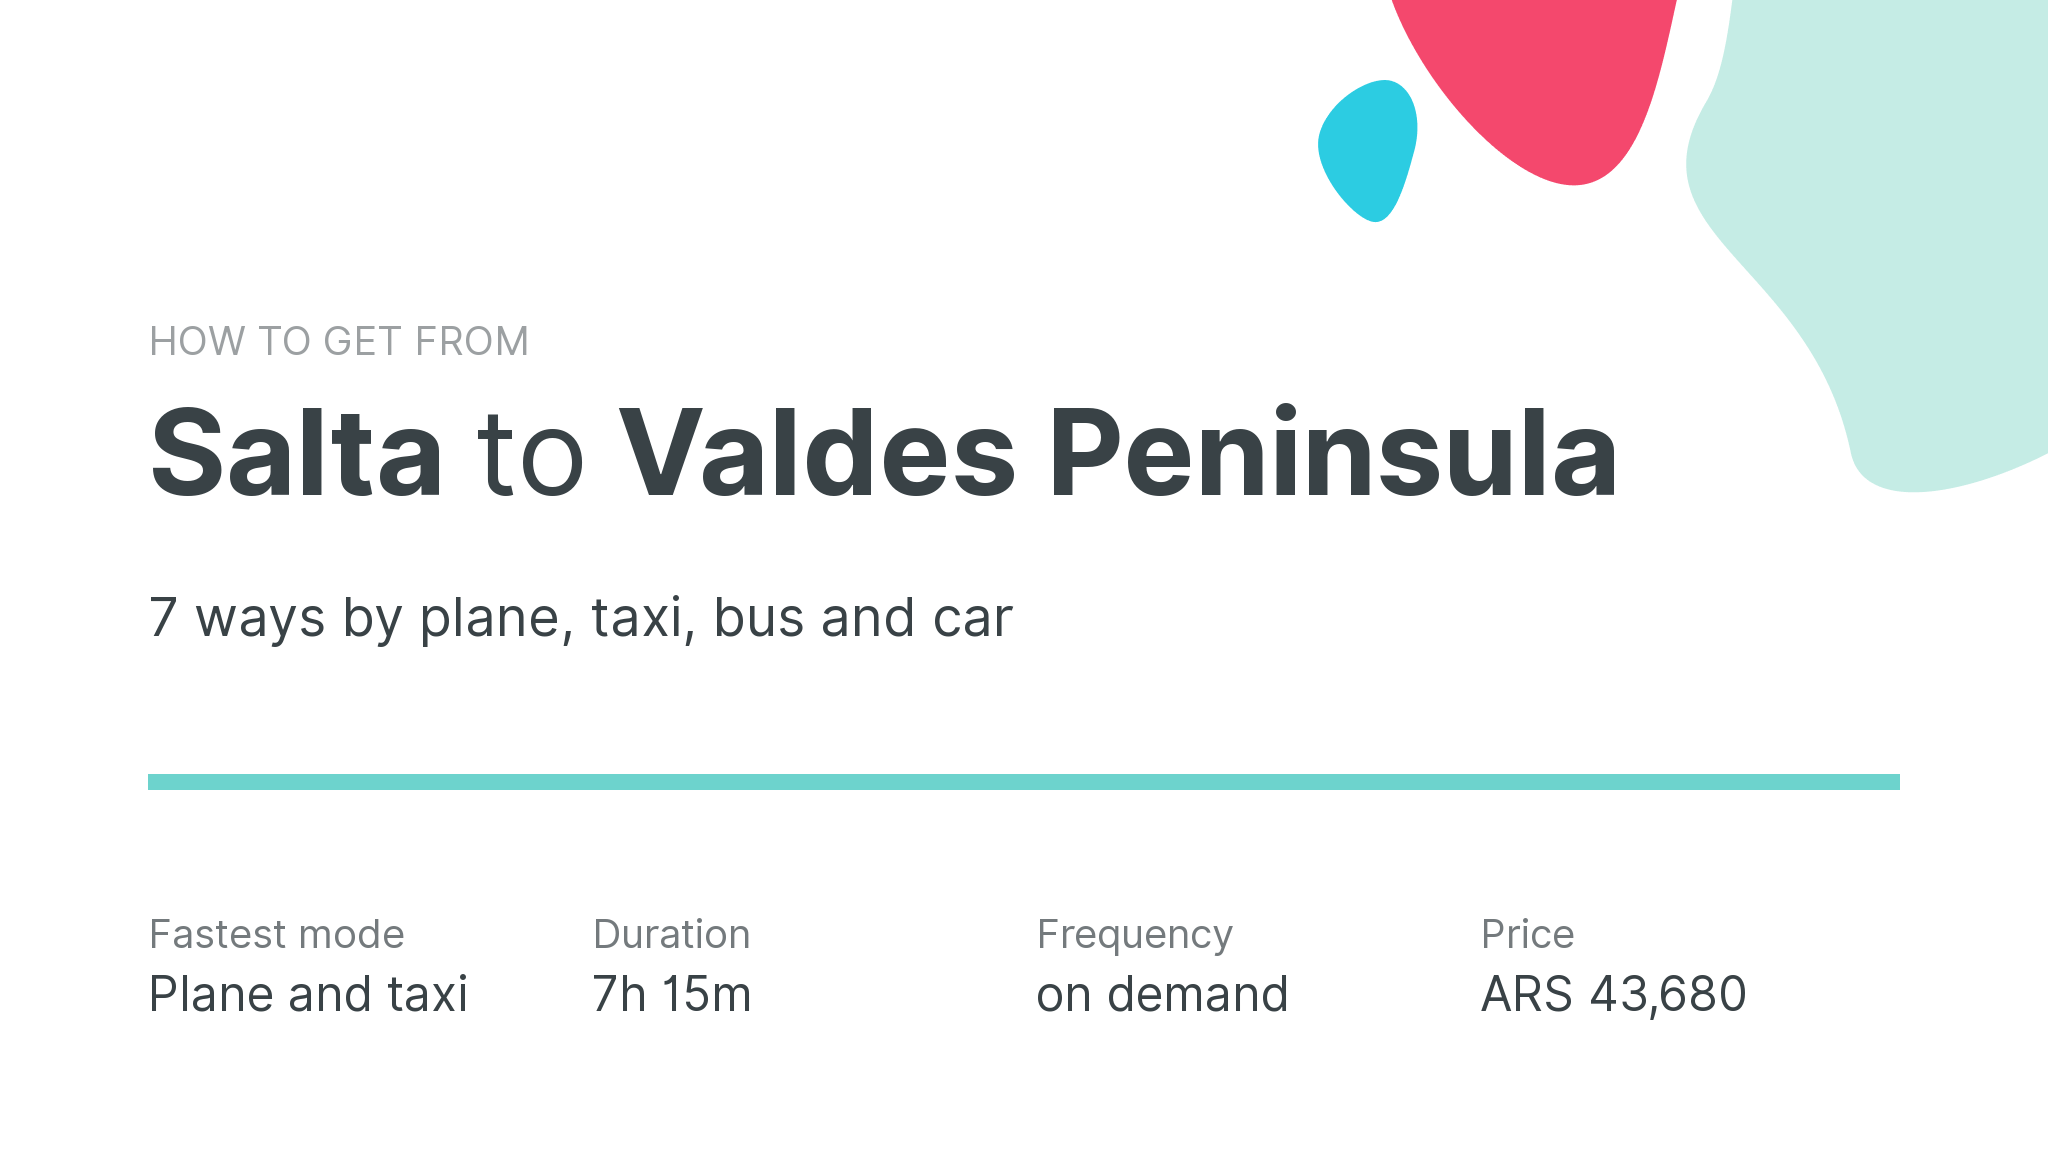 How do I get from Salta to Valdes Peninsula